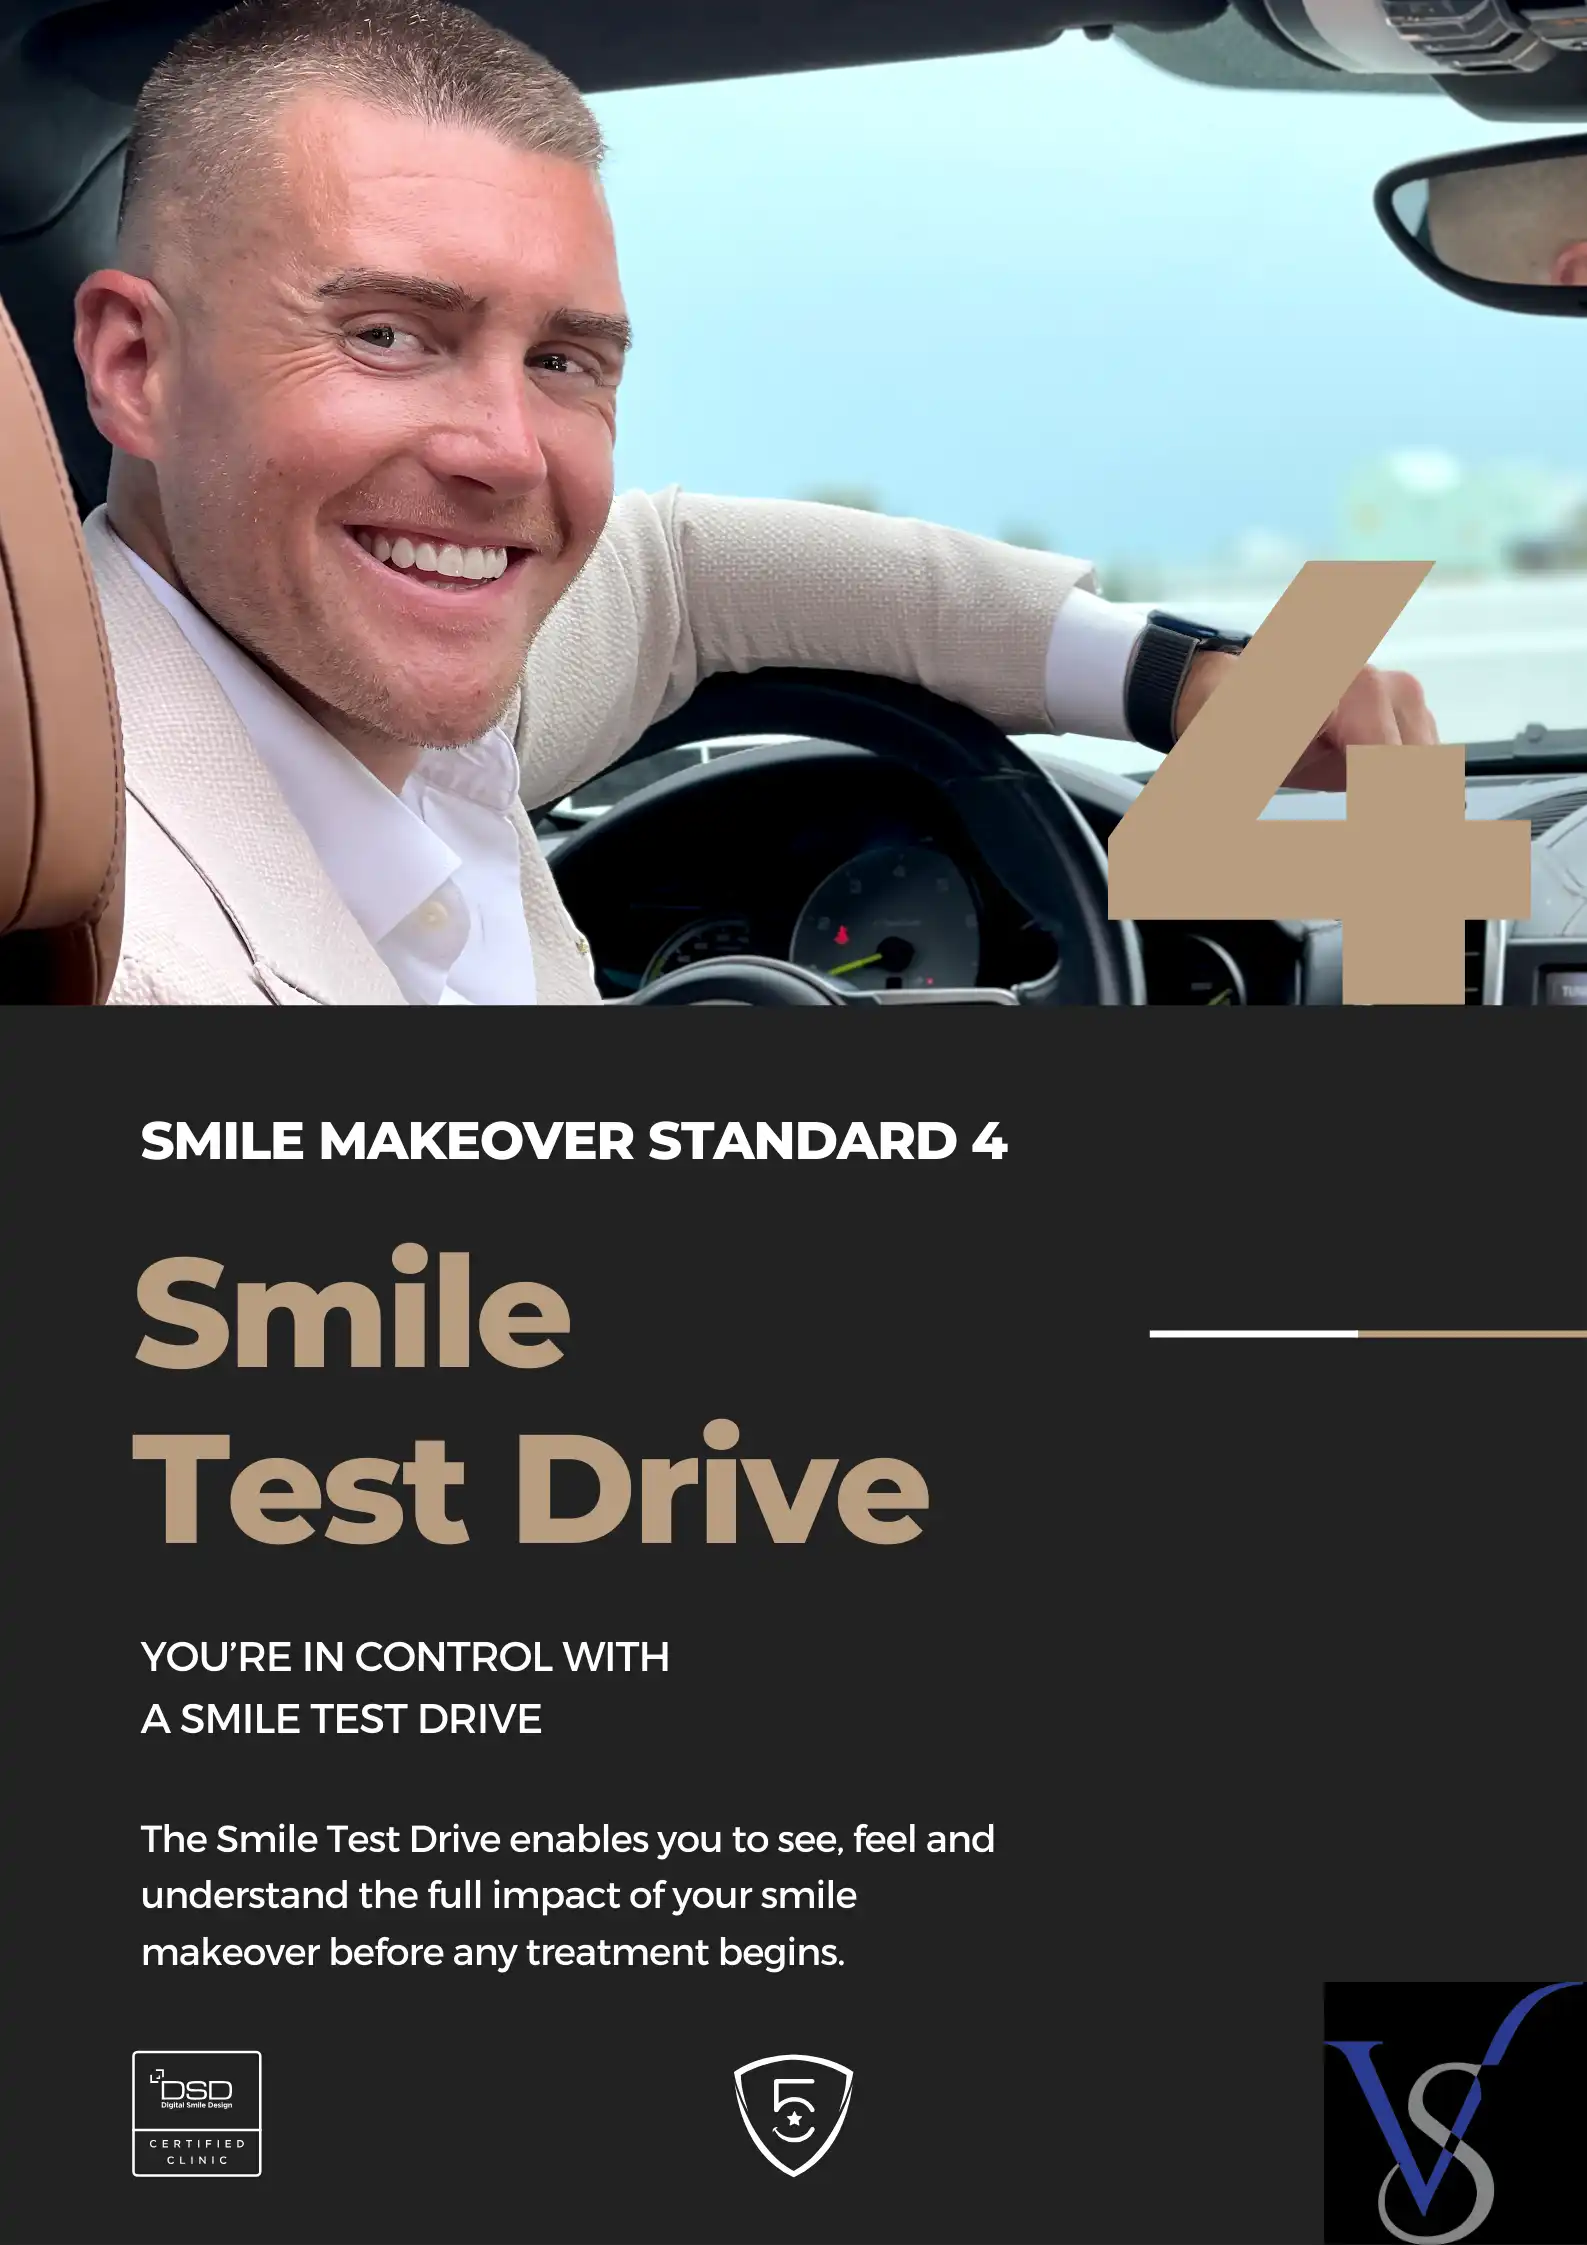 SMILE MAKEOVER STANDARD 4: YOU’RE IN CONTROL WITH A SMILE TEST DRIVE The Smile Test Drive allows you to see, feel, and understand the full impact of your smile makeover before any treatment begins